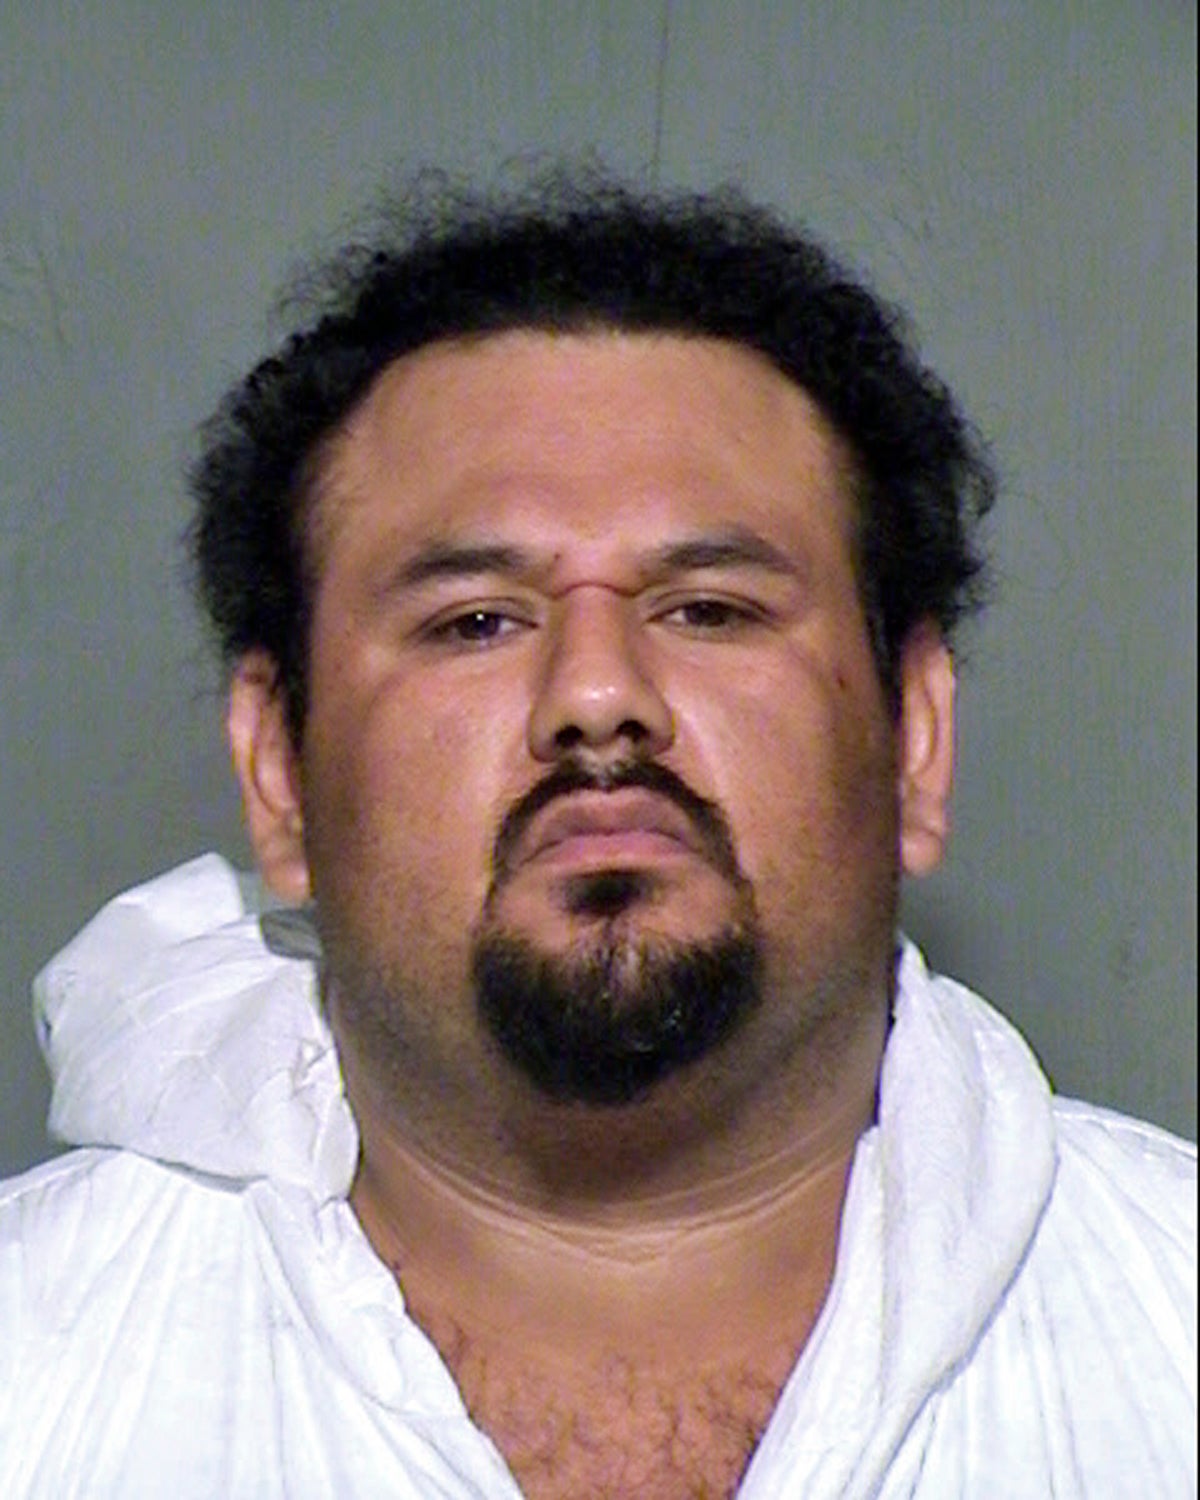 Immigrant gets 38 years in prison for fatal Arizona robbery